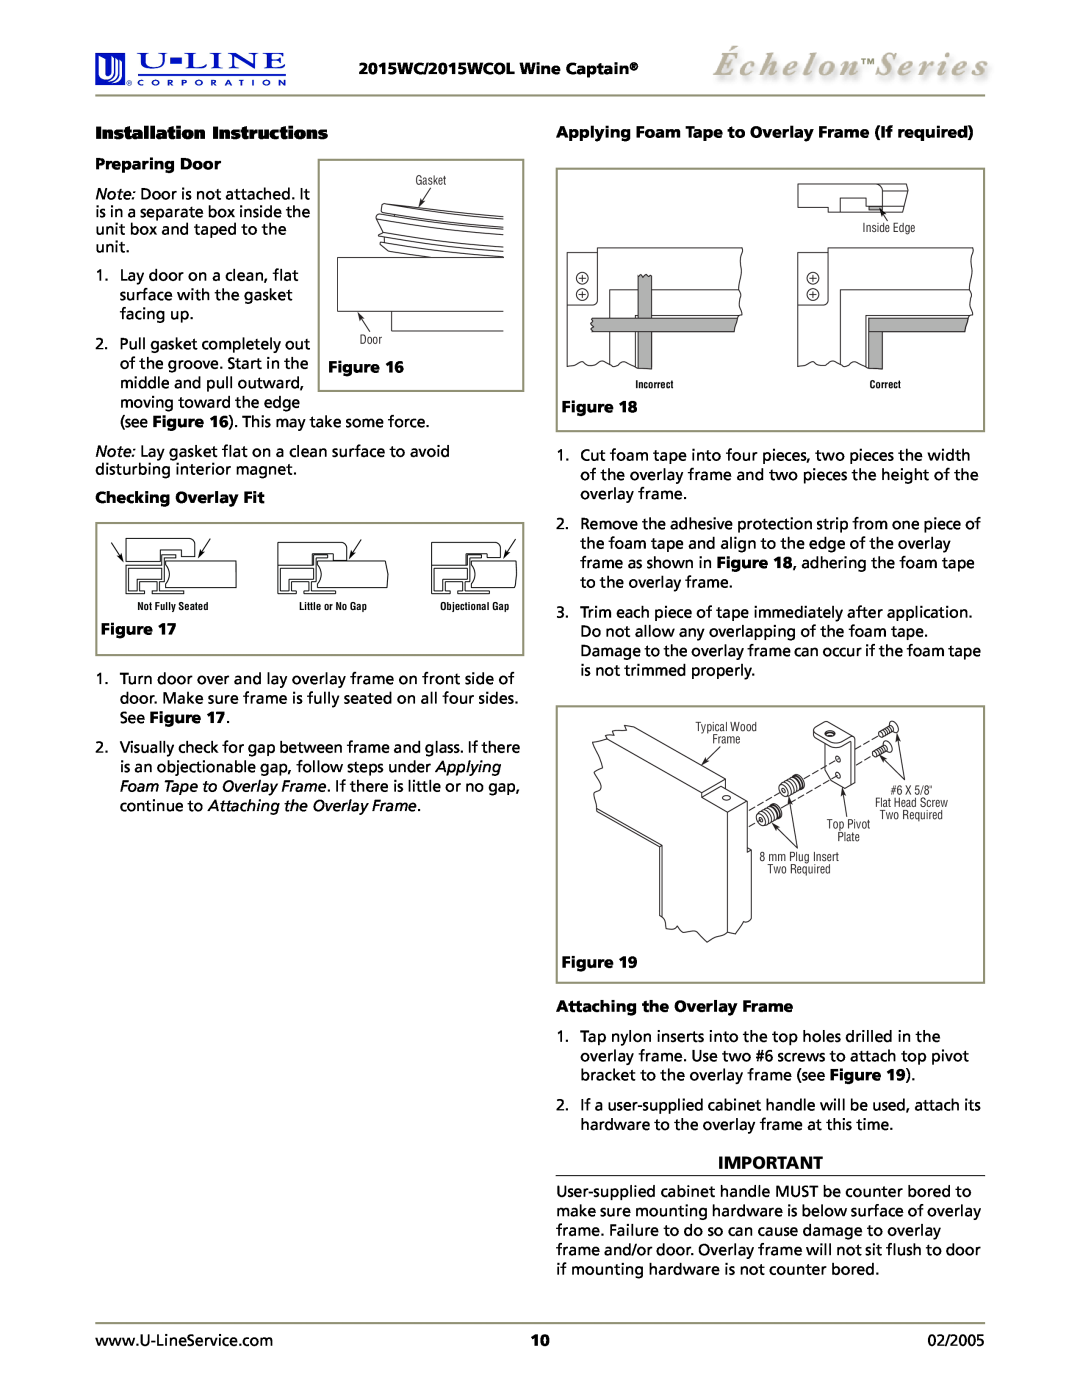 U-Line 2015WC manual Installation Instructions, Preparing Door, Checking Overlay Fit, Figure Attaching the Overlay Frame 